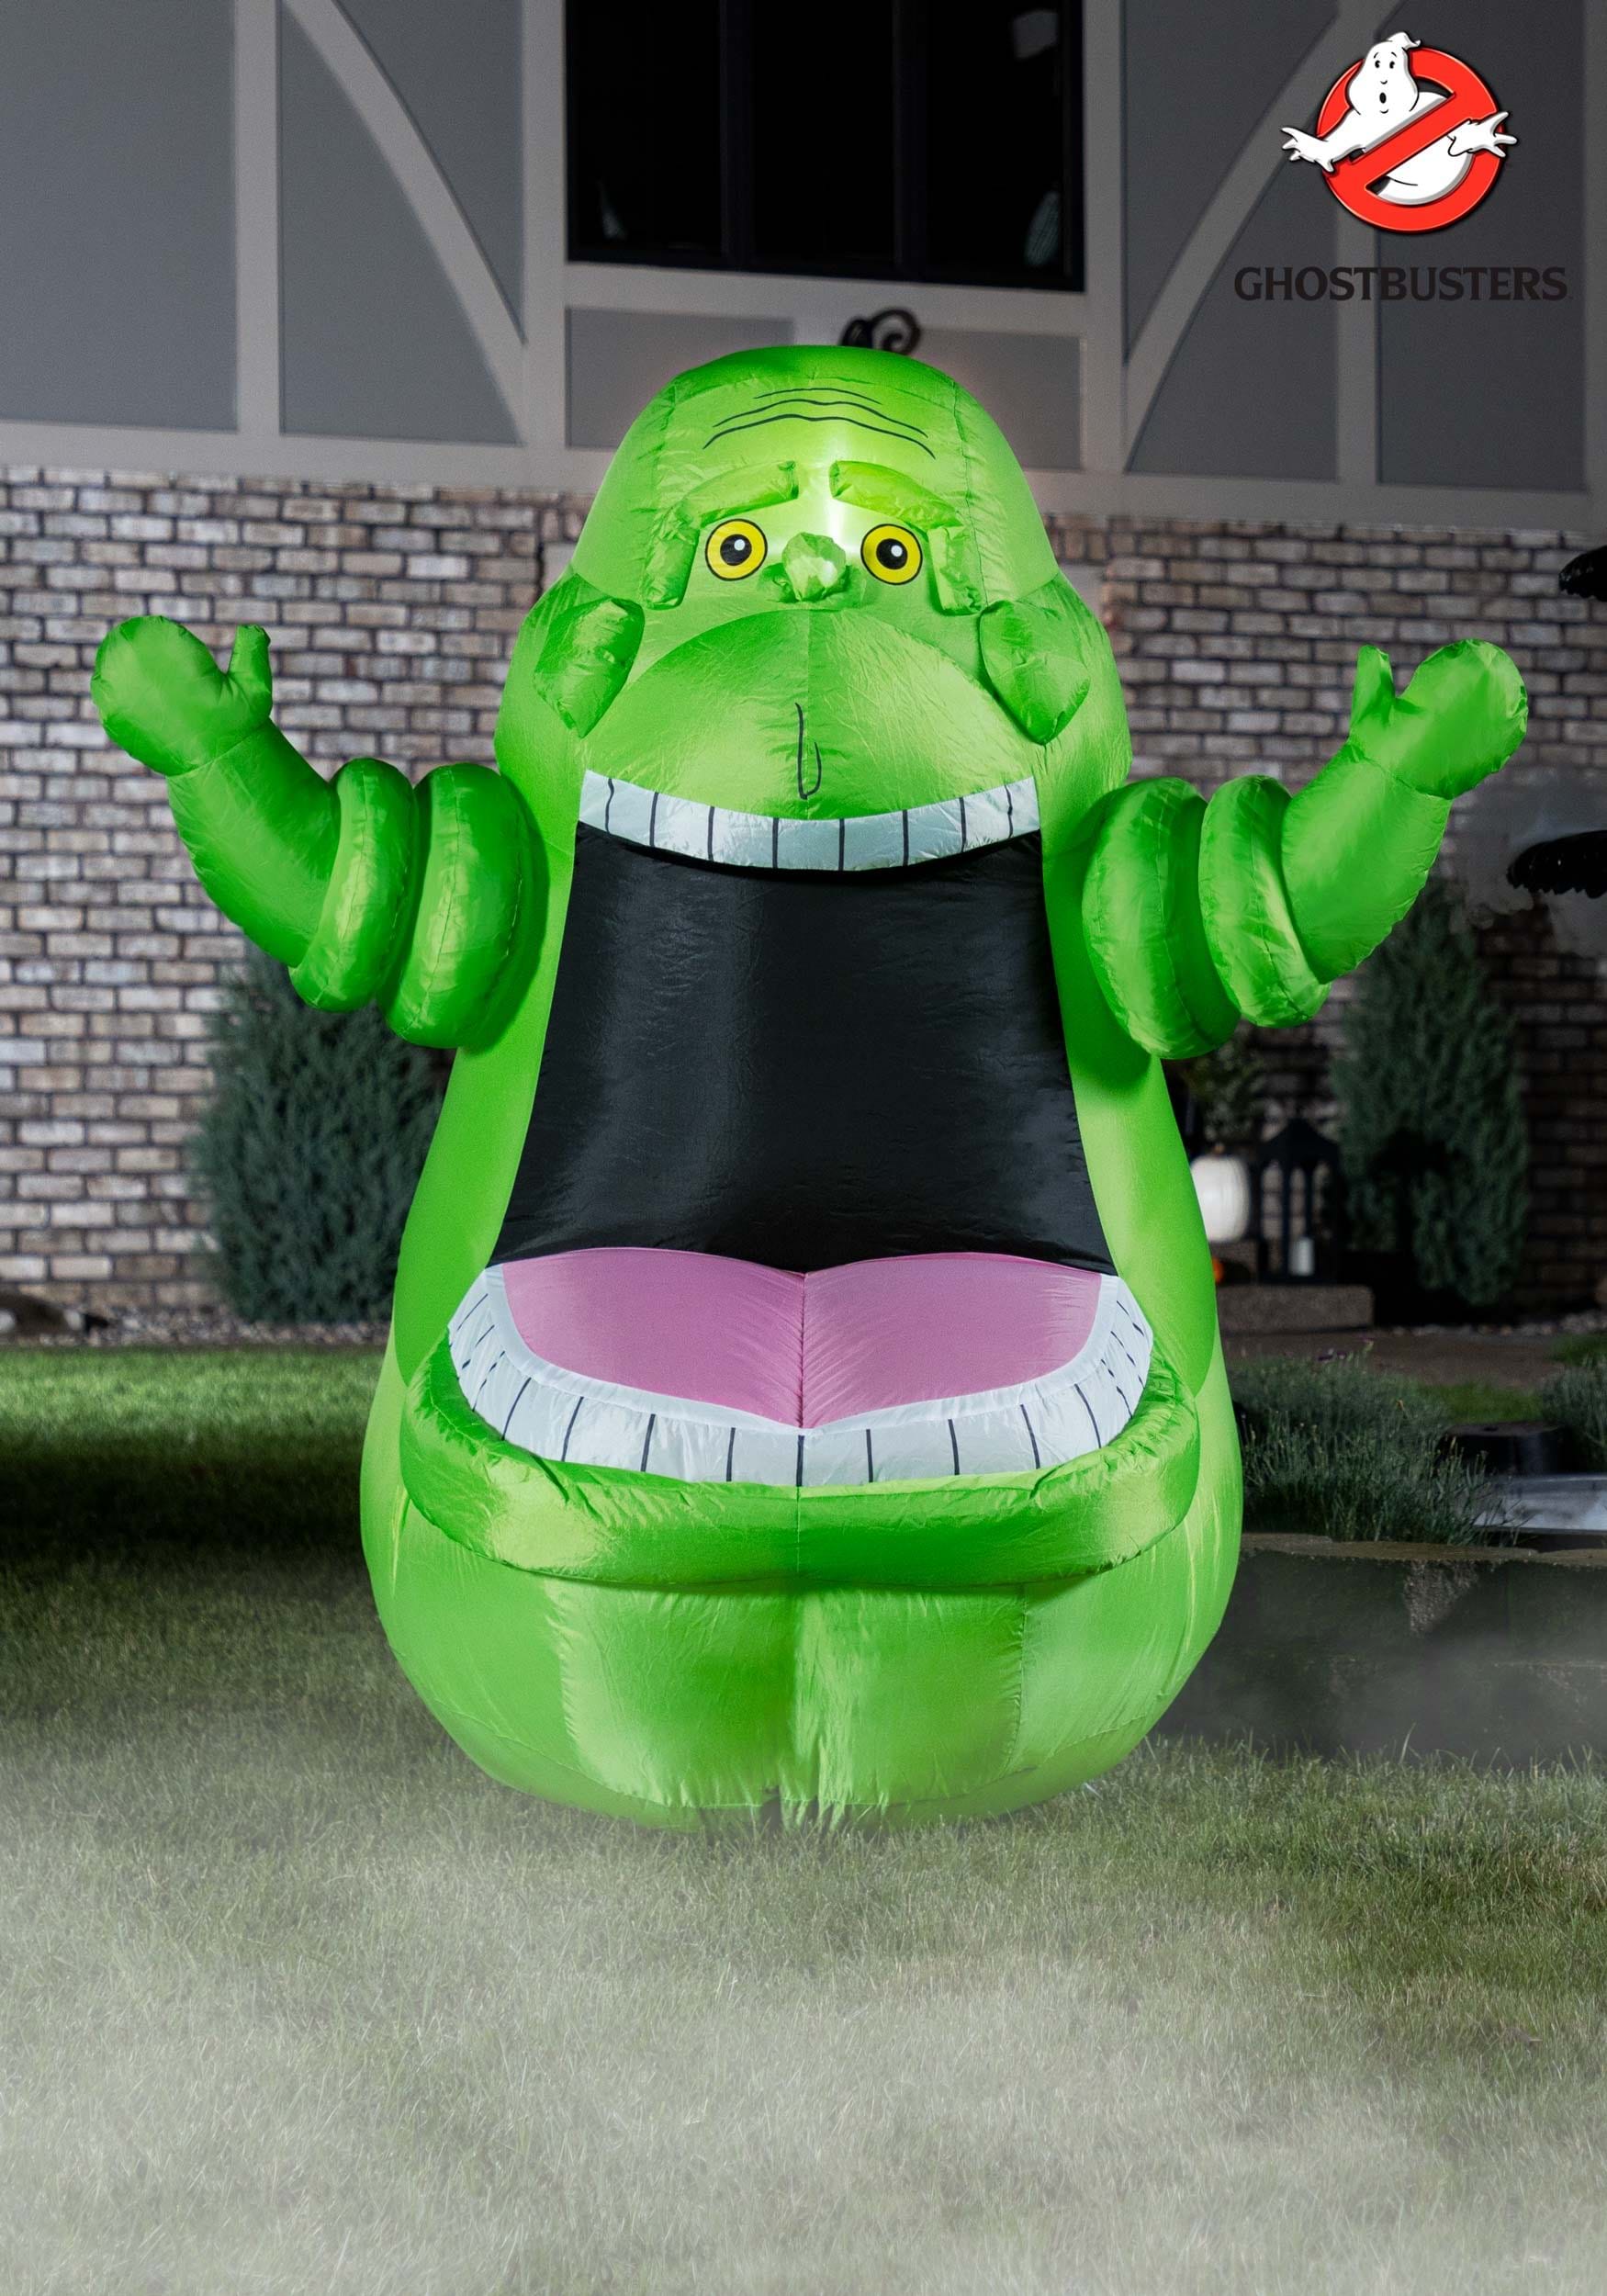 Ghostbusters 5FT Inflatable Slimer Decoration